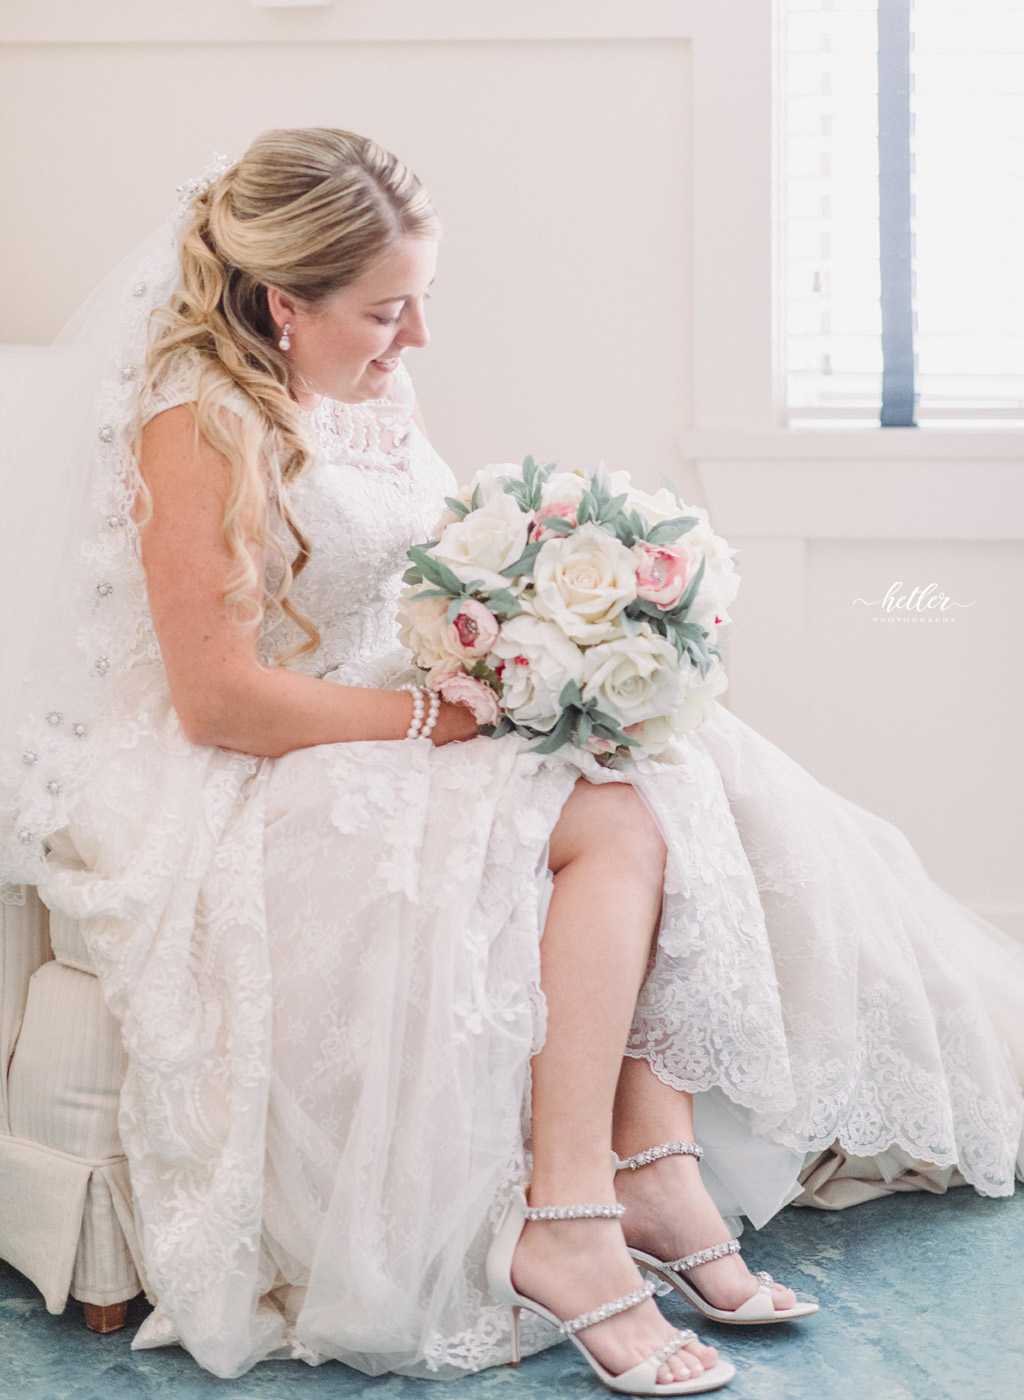 Choosing your wedding day getting ready location by finding good light and neutral colors